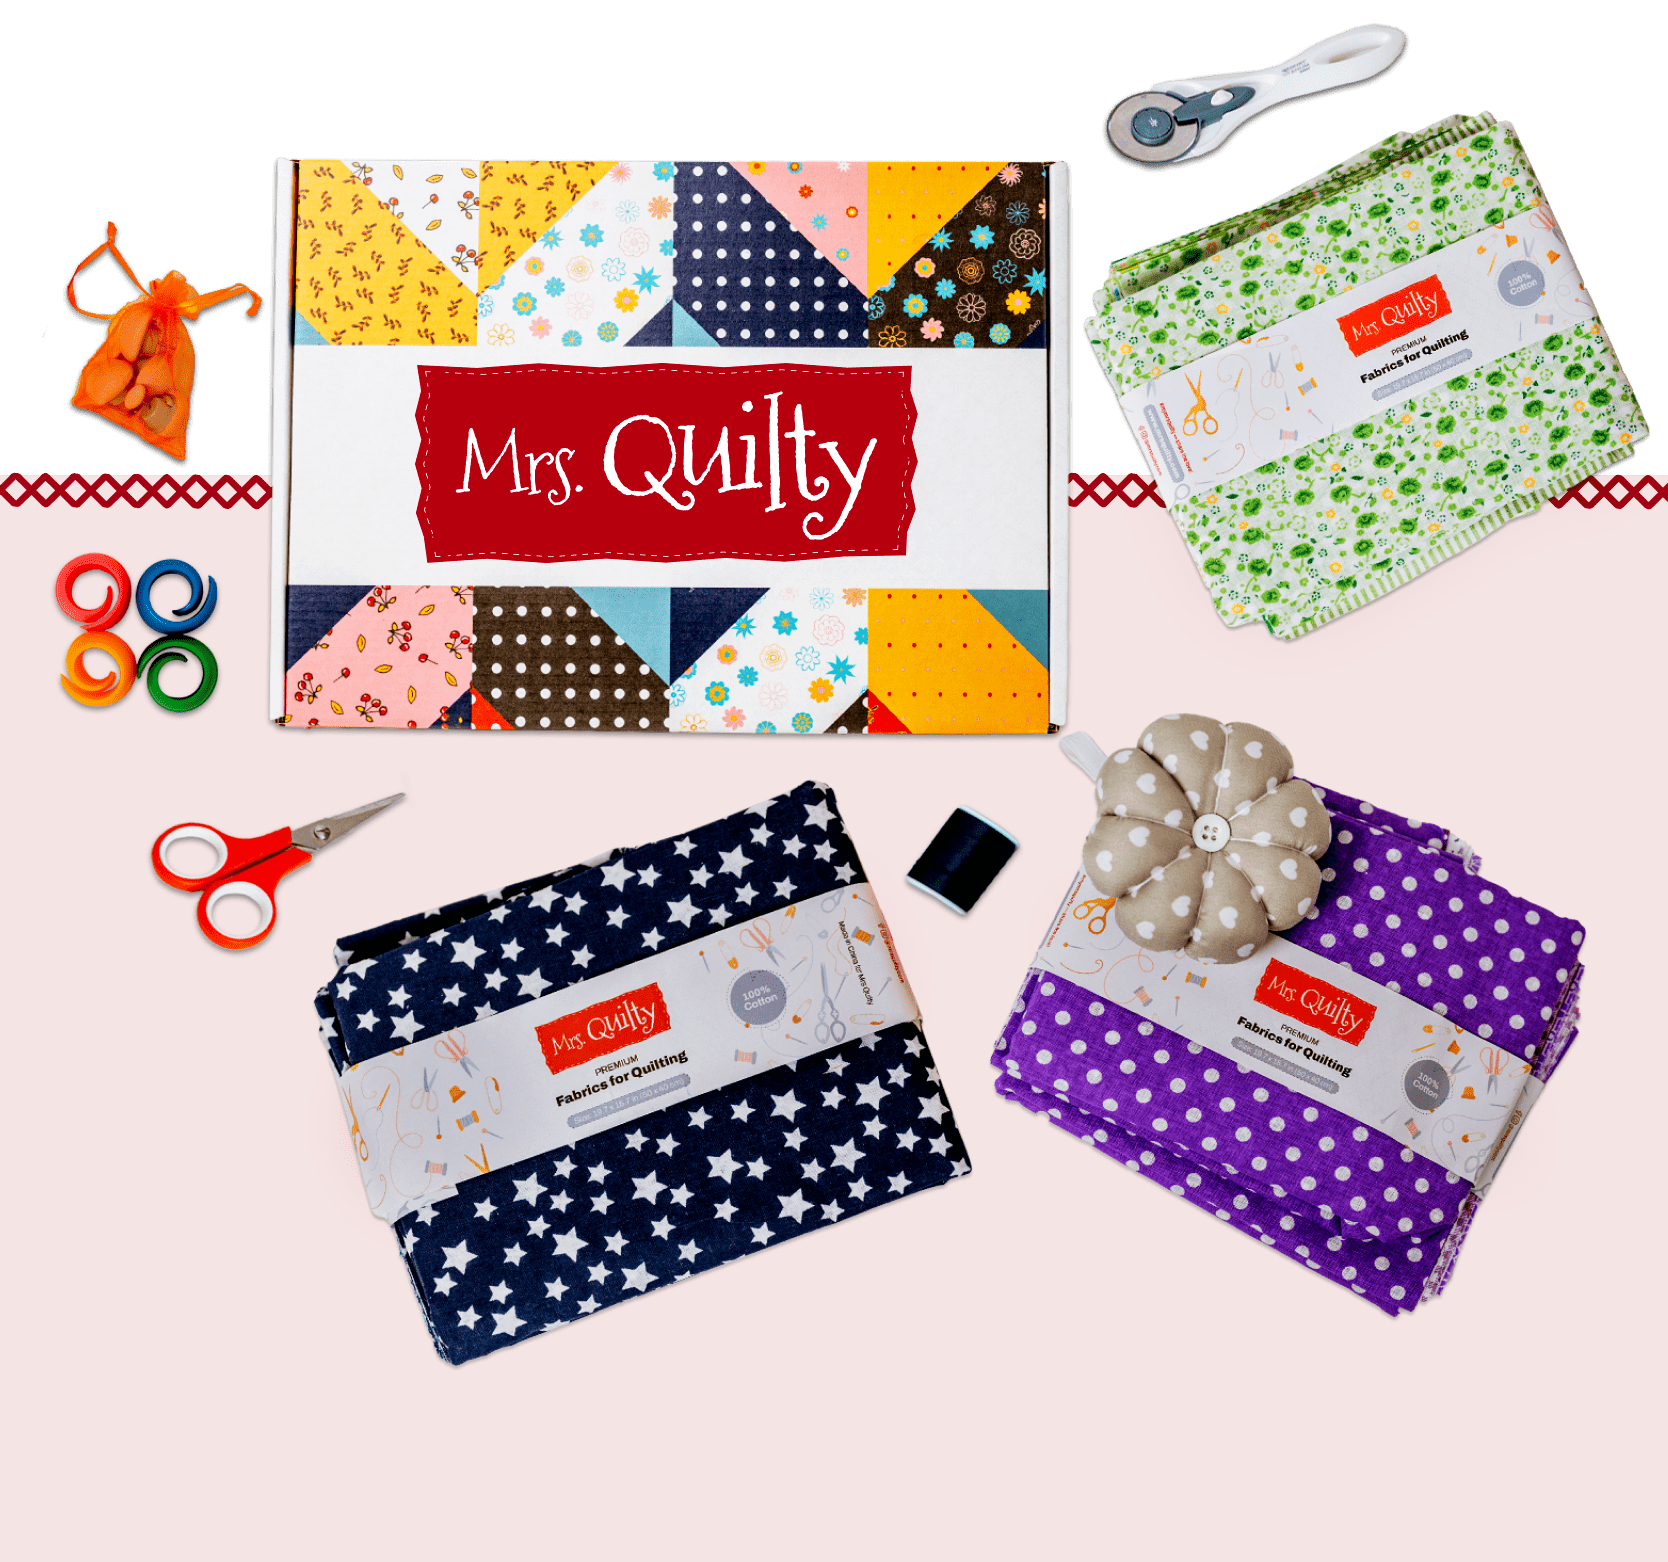 42-Piece Quilting Kit: Start Your Quilting Journey Right – Mrs Quilty